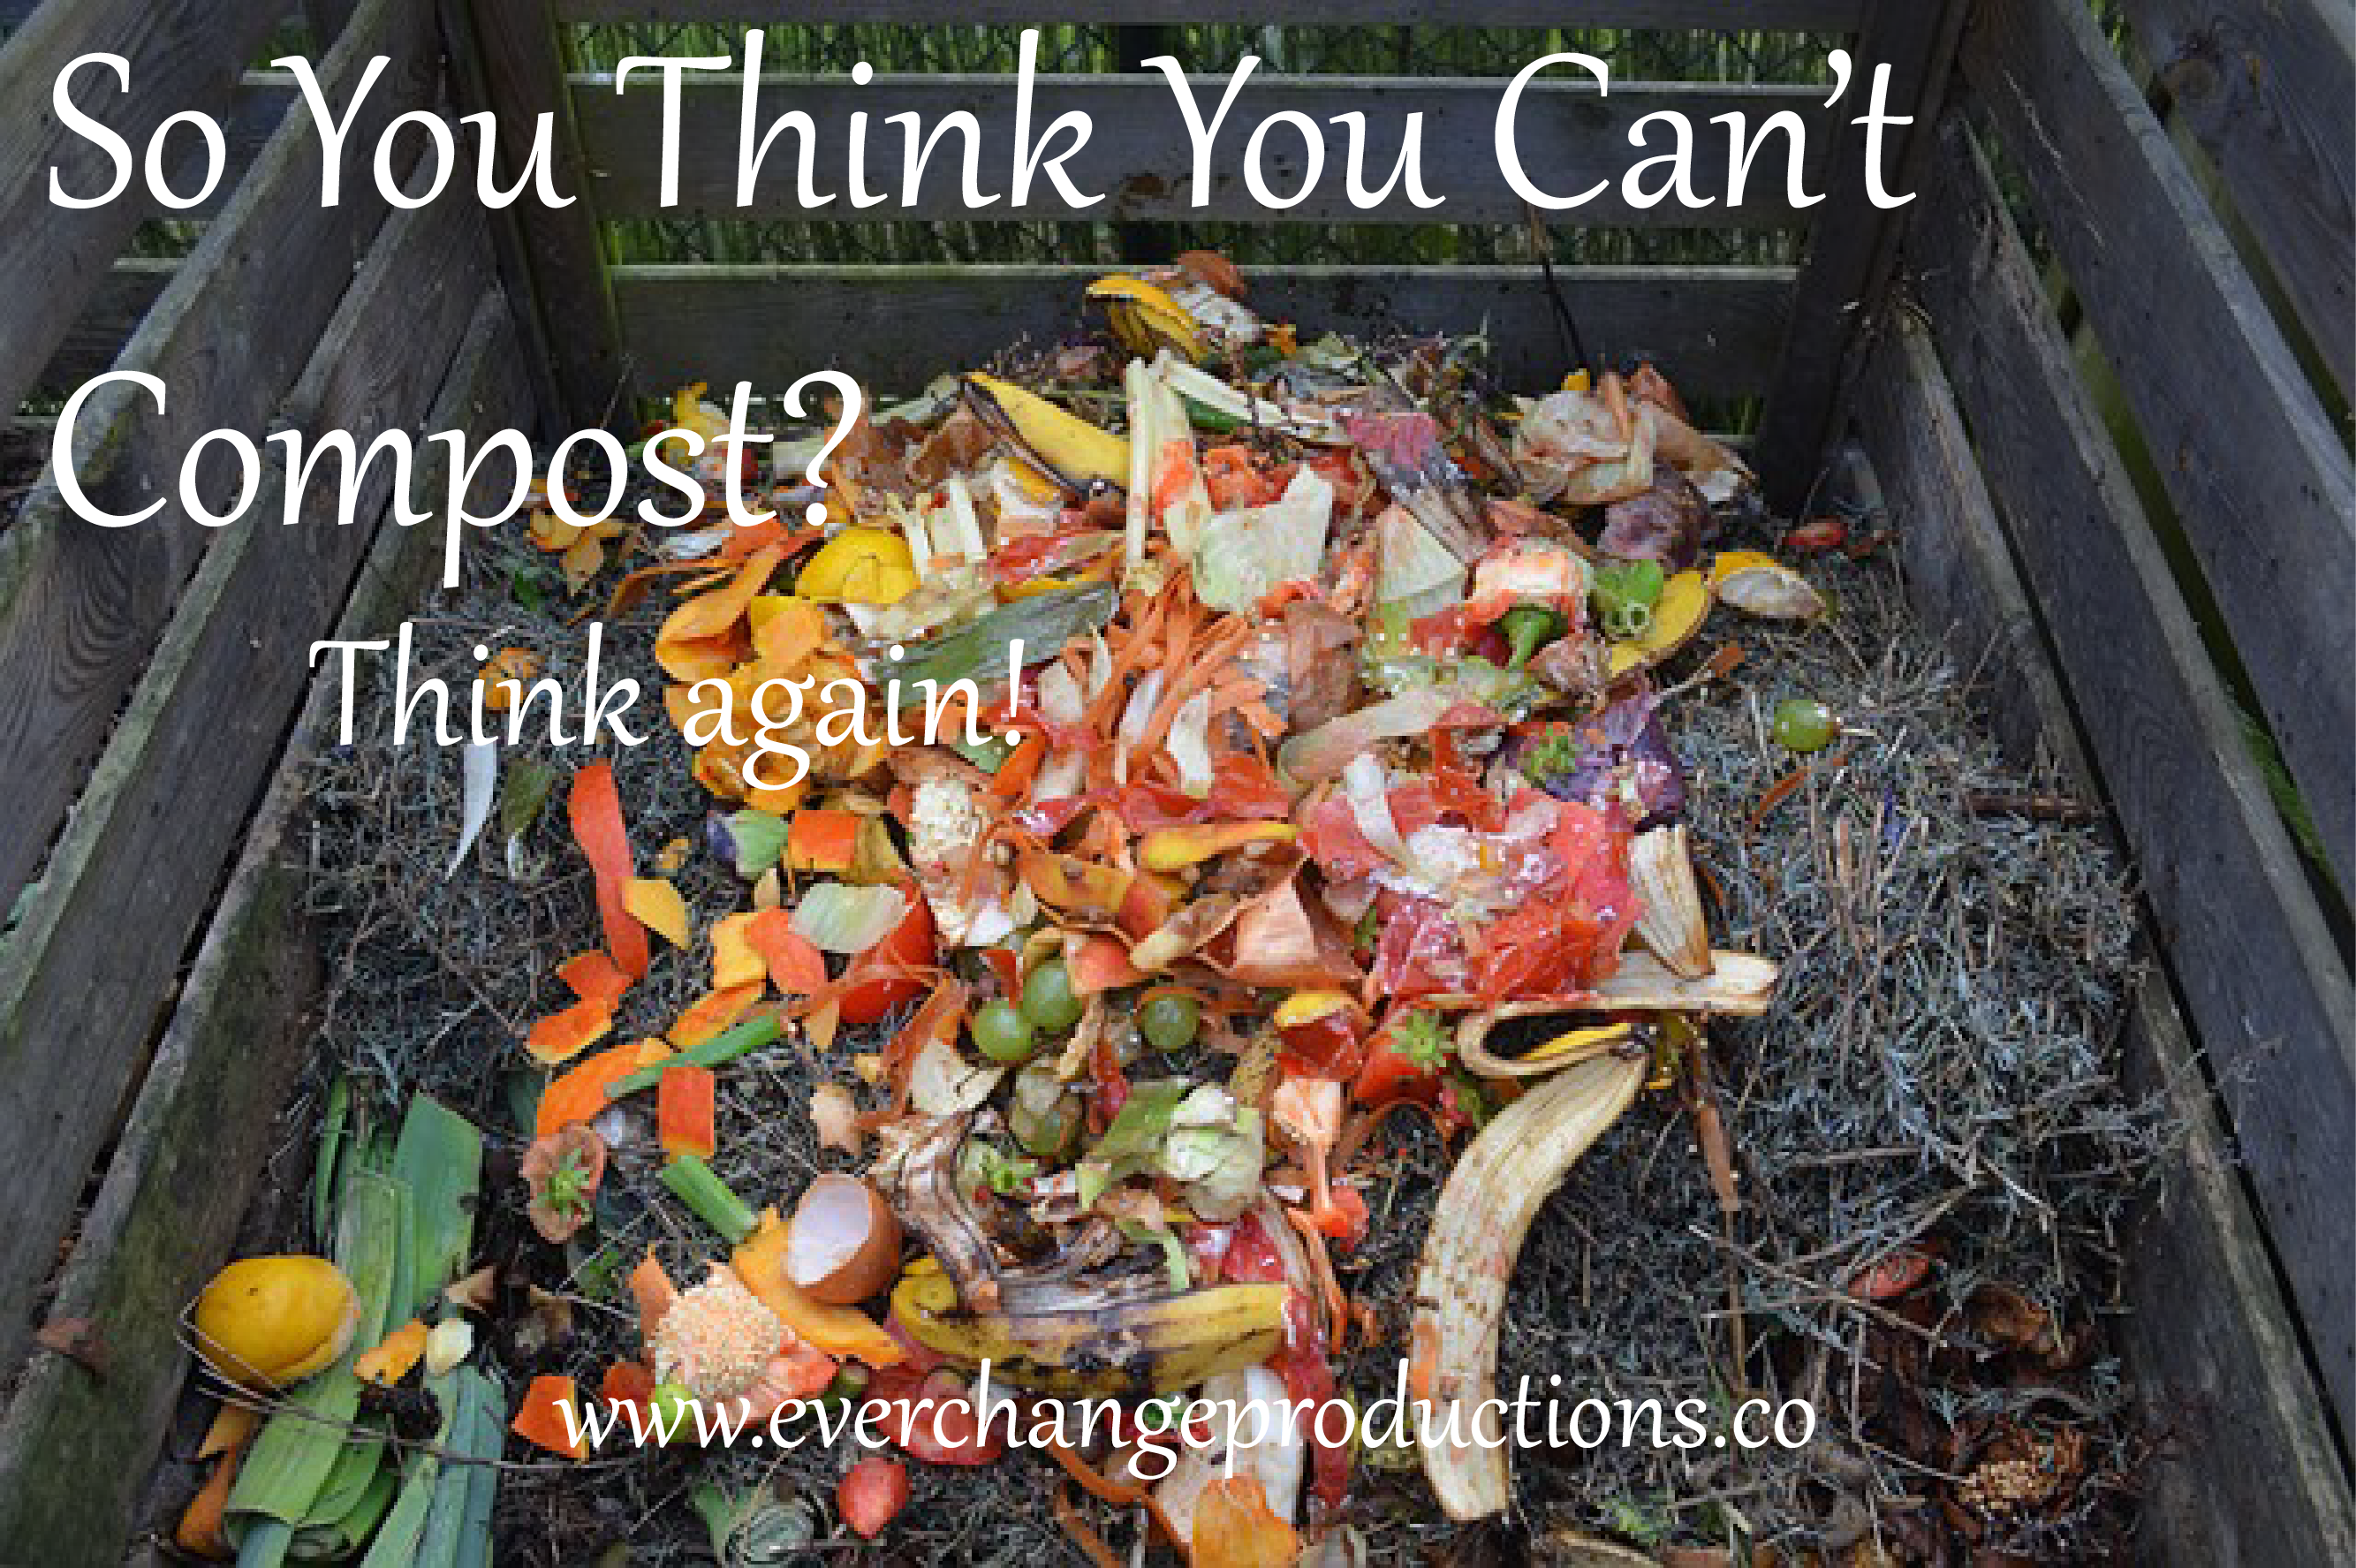 So you think you can't compost? Think again!